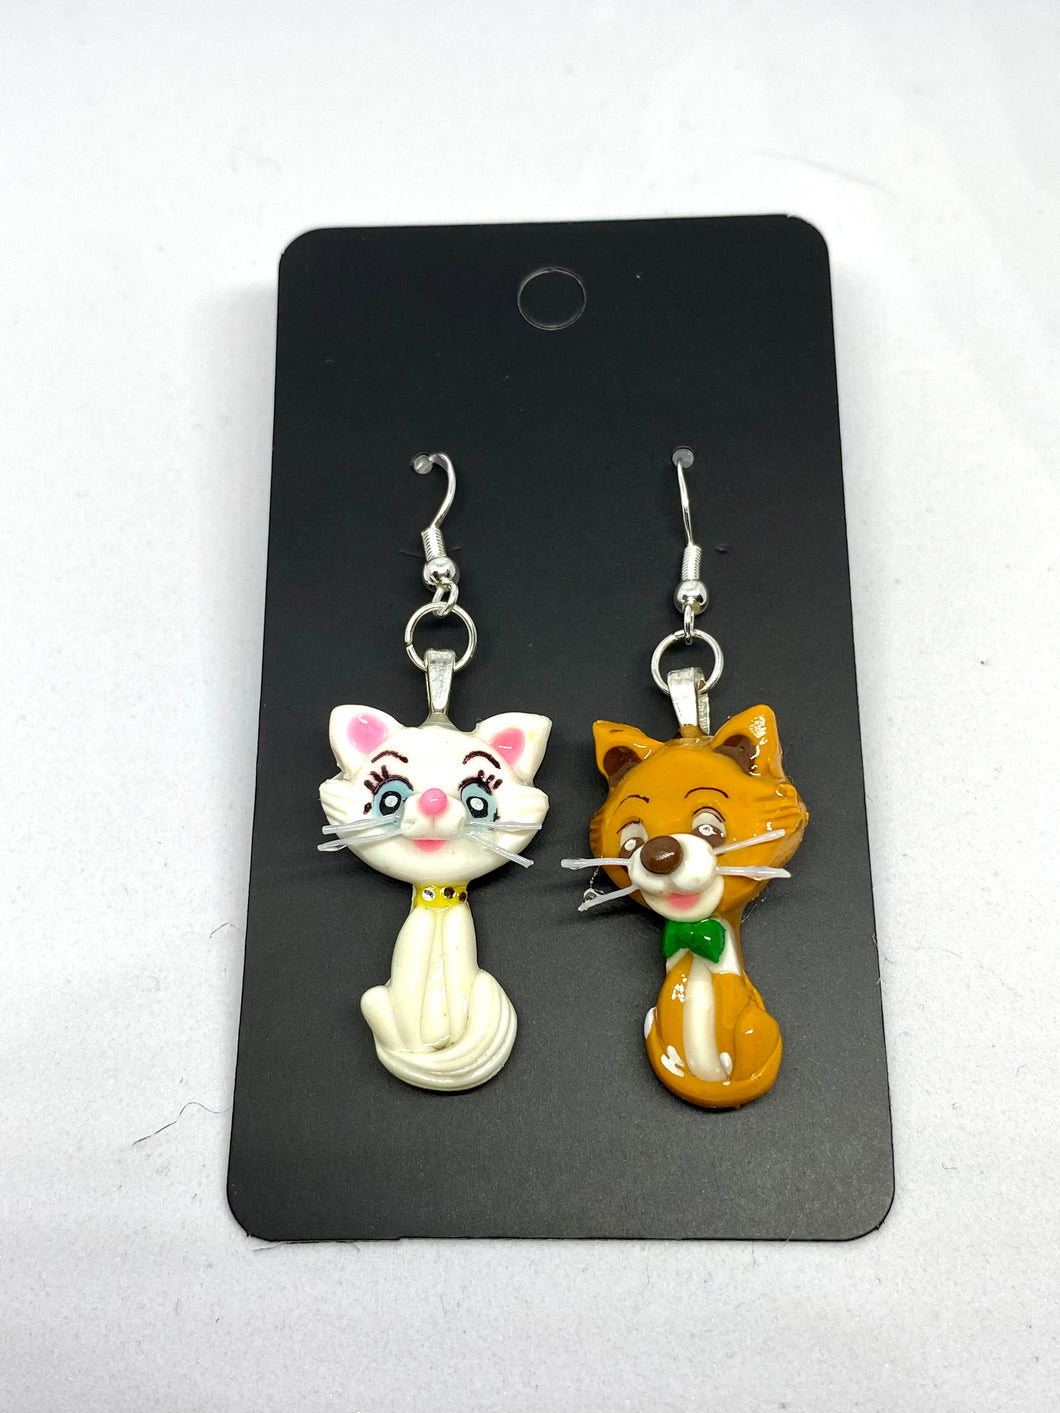 Dutchess and Alley Cat Clay Earrings